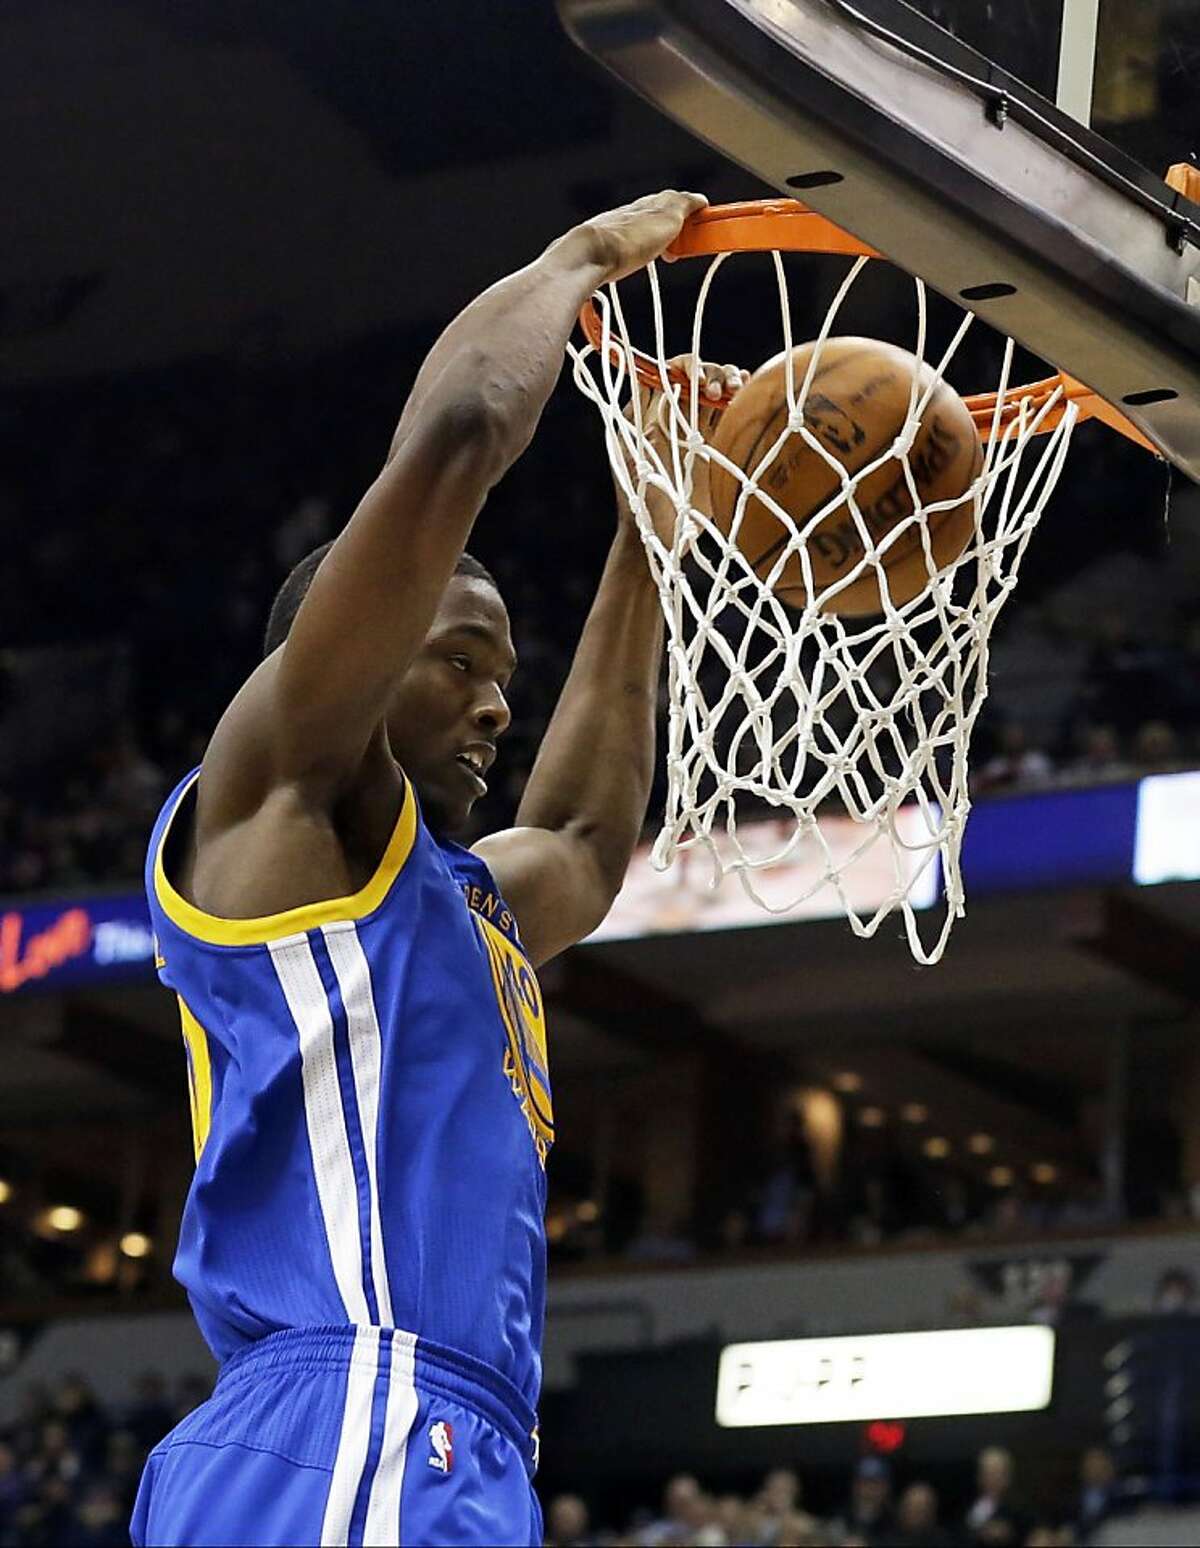 Golden State Warriors' Harrison Barnes slams in two points in the second half of an NBA basketball game against the Minnesota Timberwolves, Wednesday, Nov. 6, 2013, in Minneapolis. The Warriors won 106-93. (AP Photo/Jim Mone)